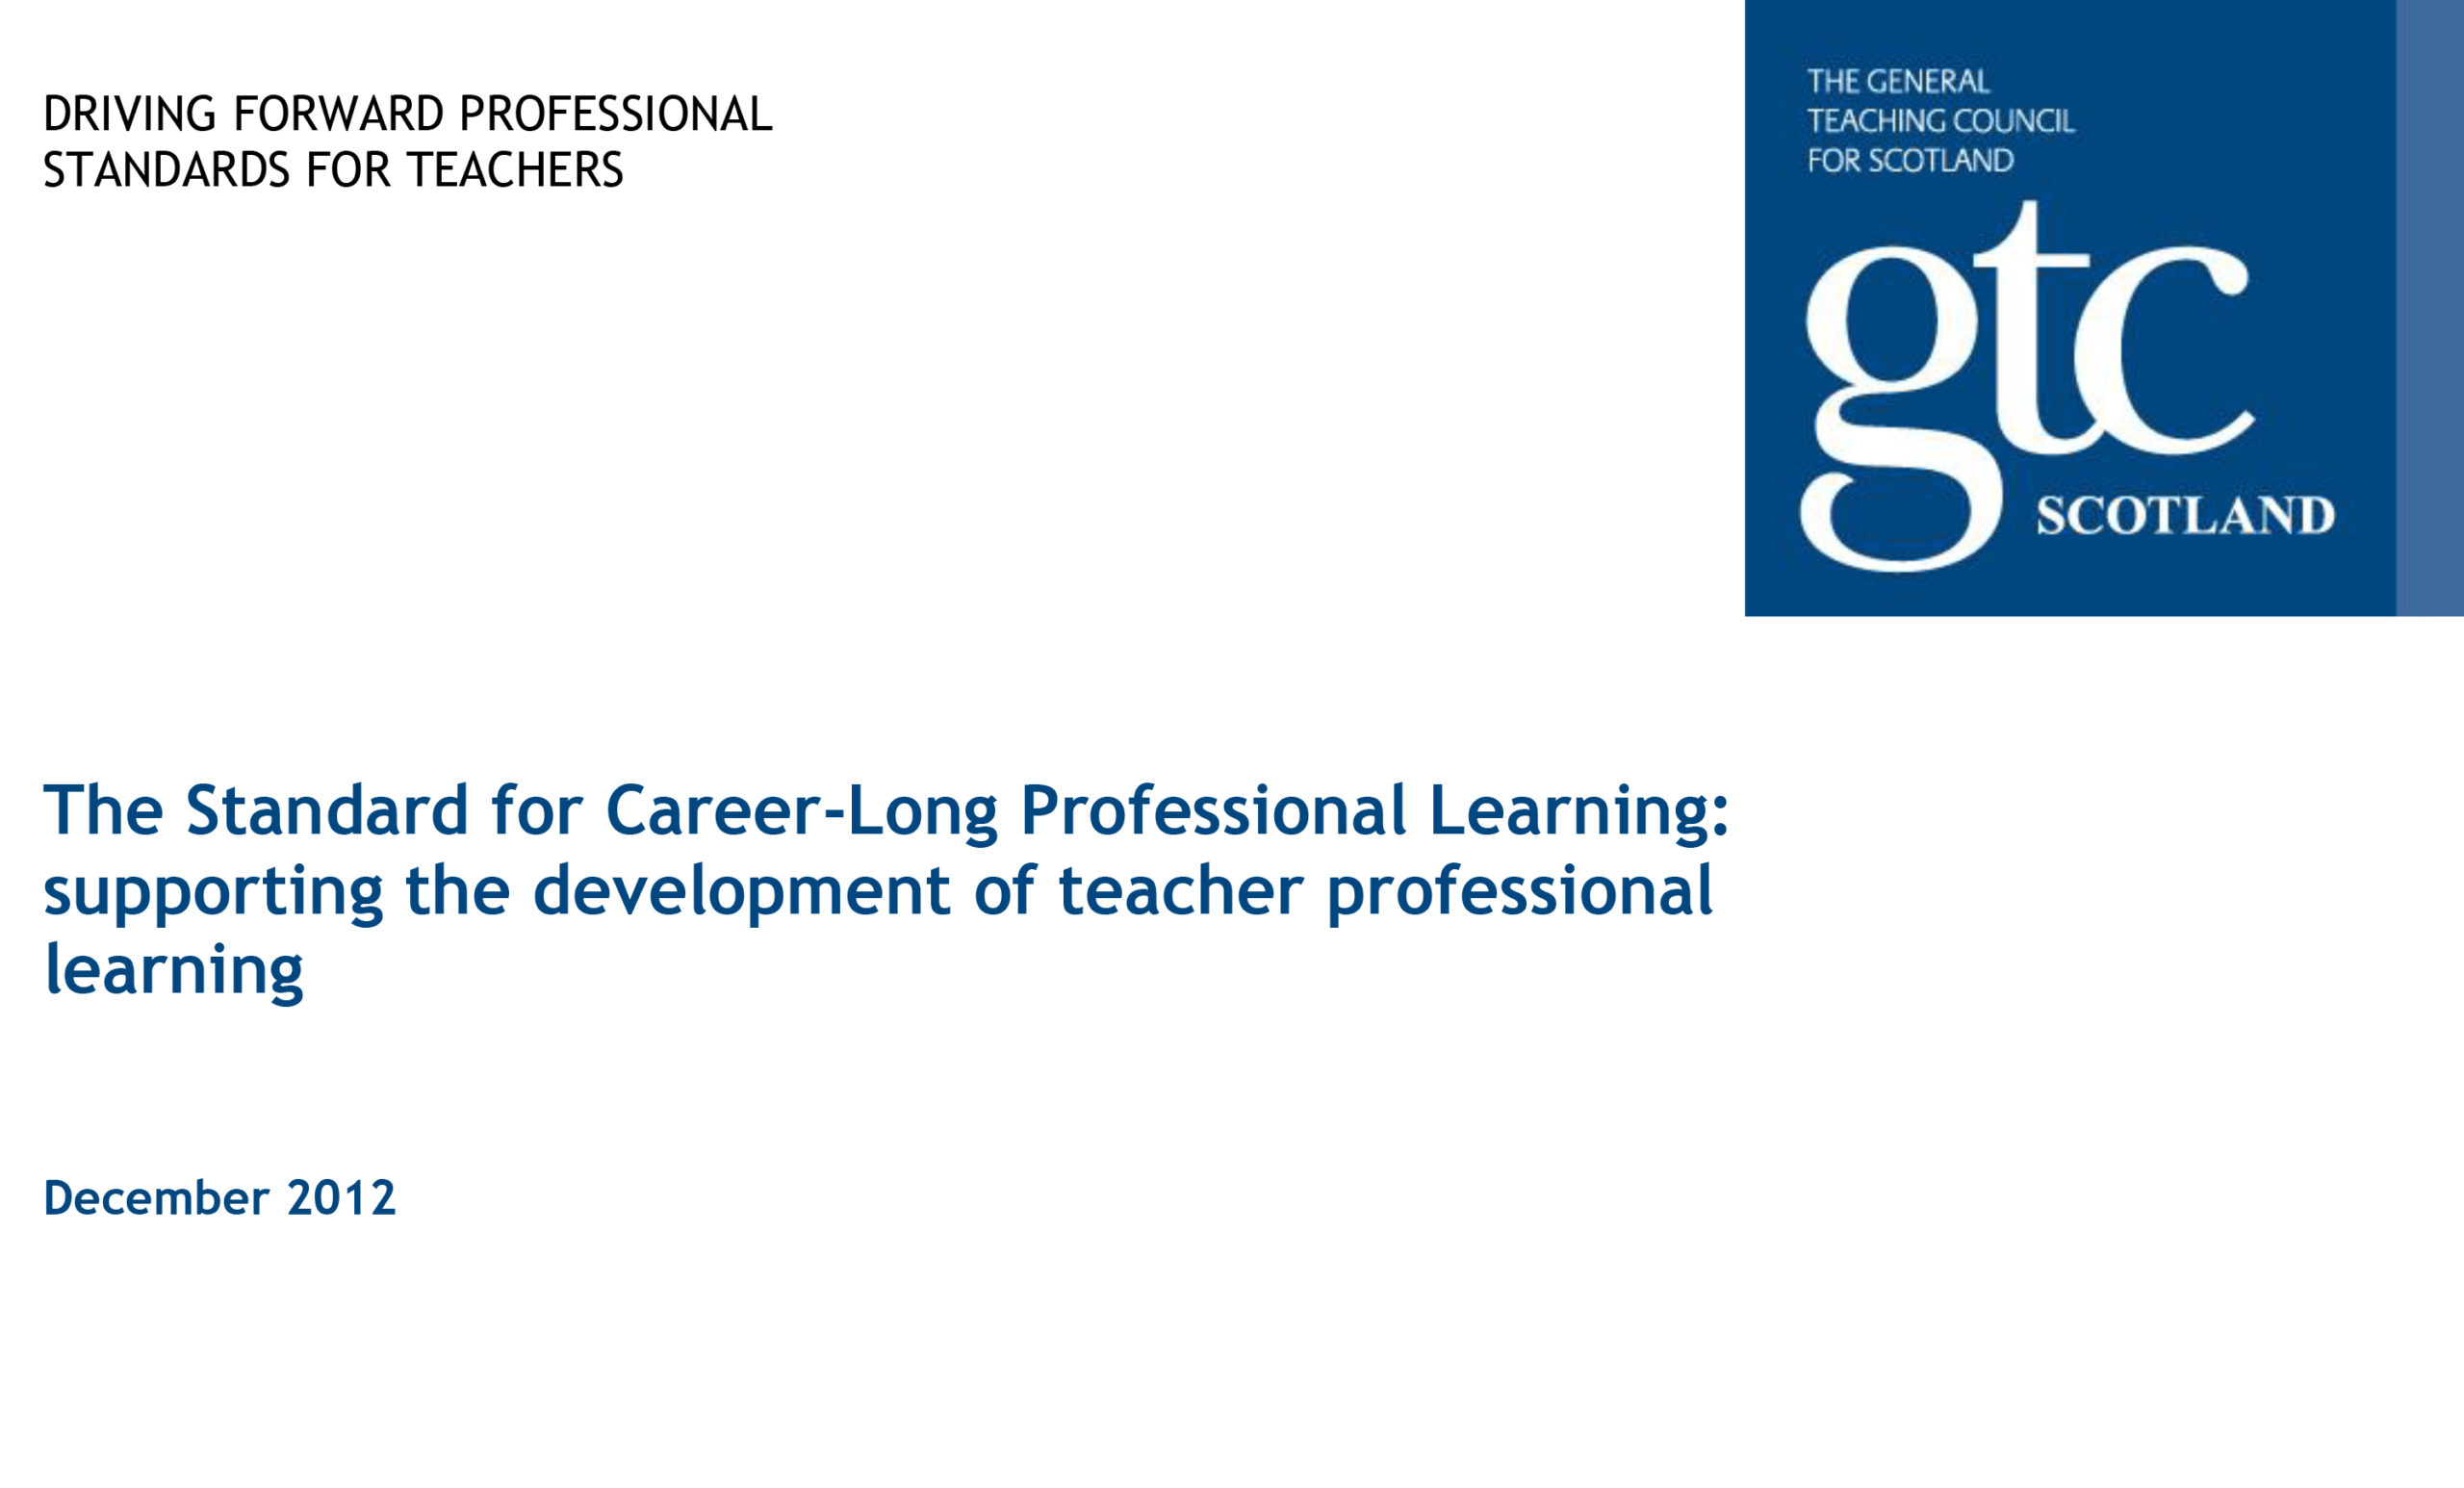 The Standard for Career-Long Professional Learning